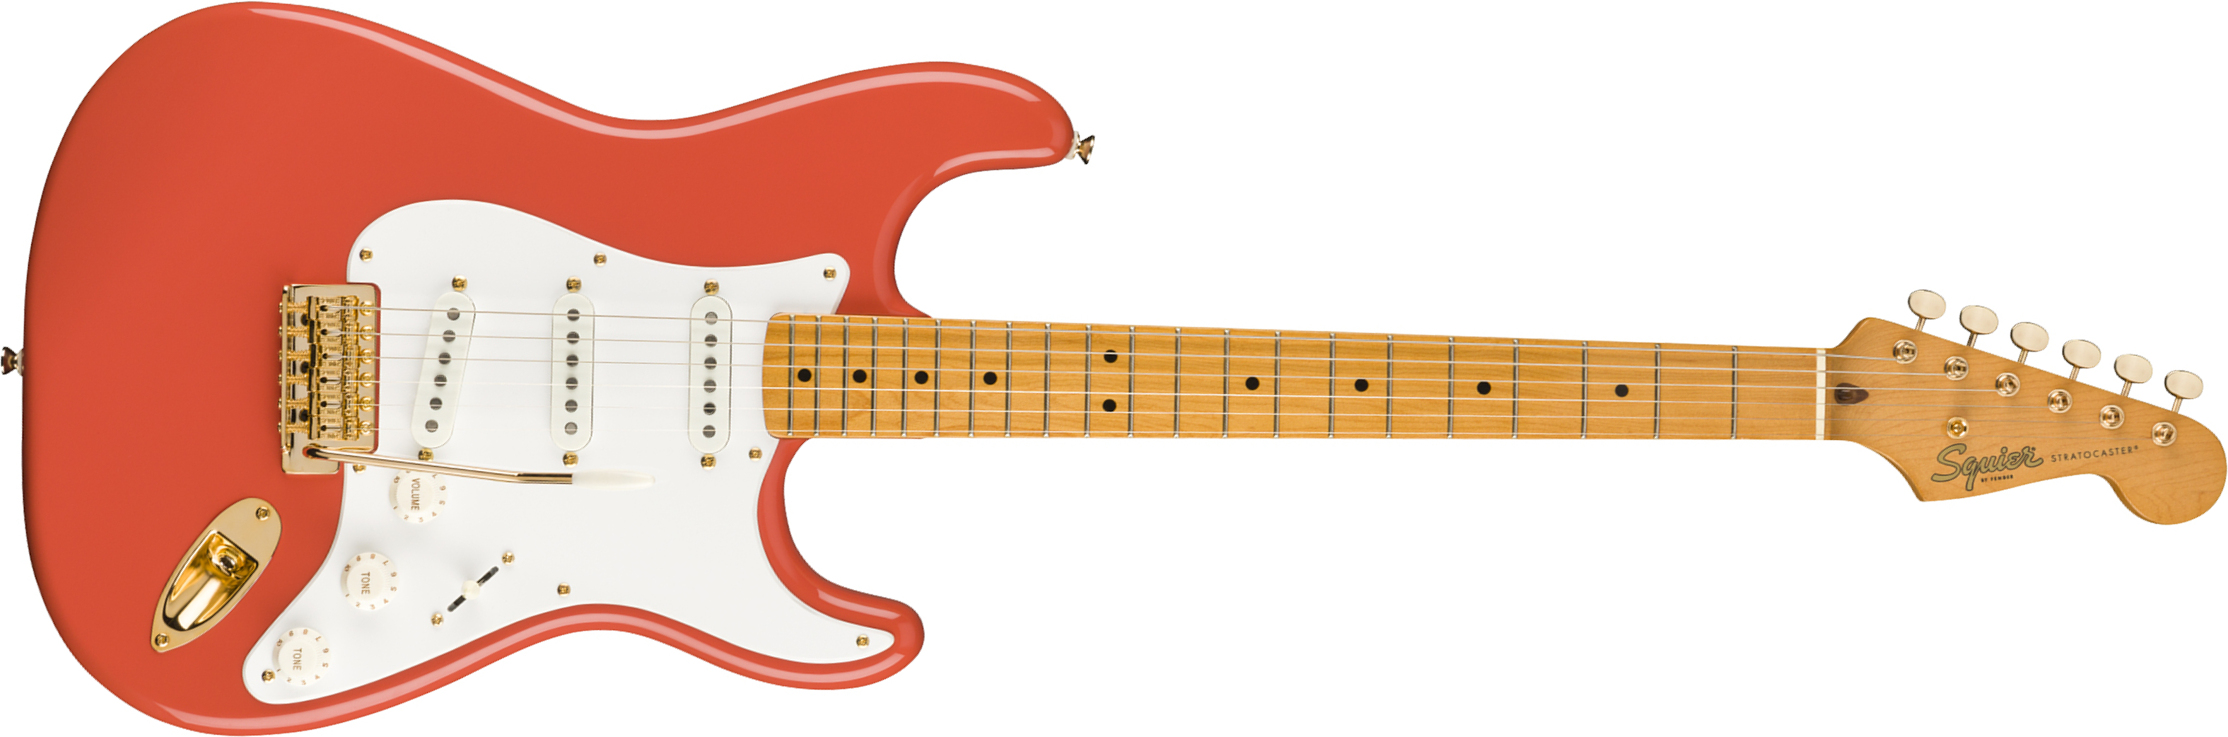 Squier Strat Classic Vibe '50s Fsr Ltd Mn - Fiesta Red With Gold Hardware - Str shape electric guitar - Main picture